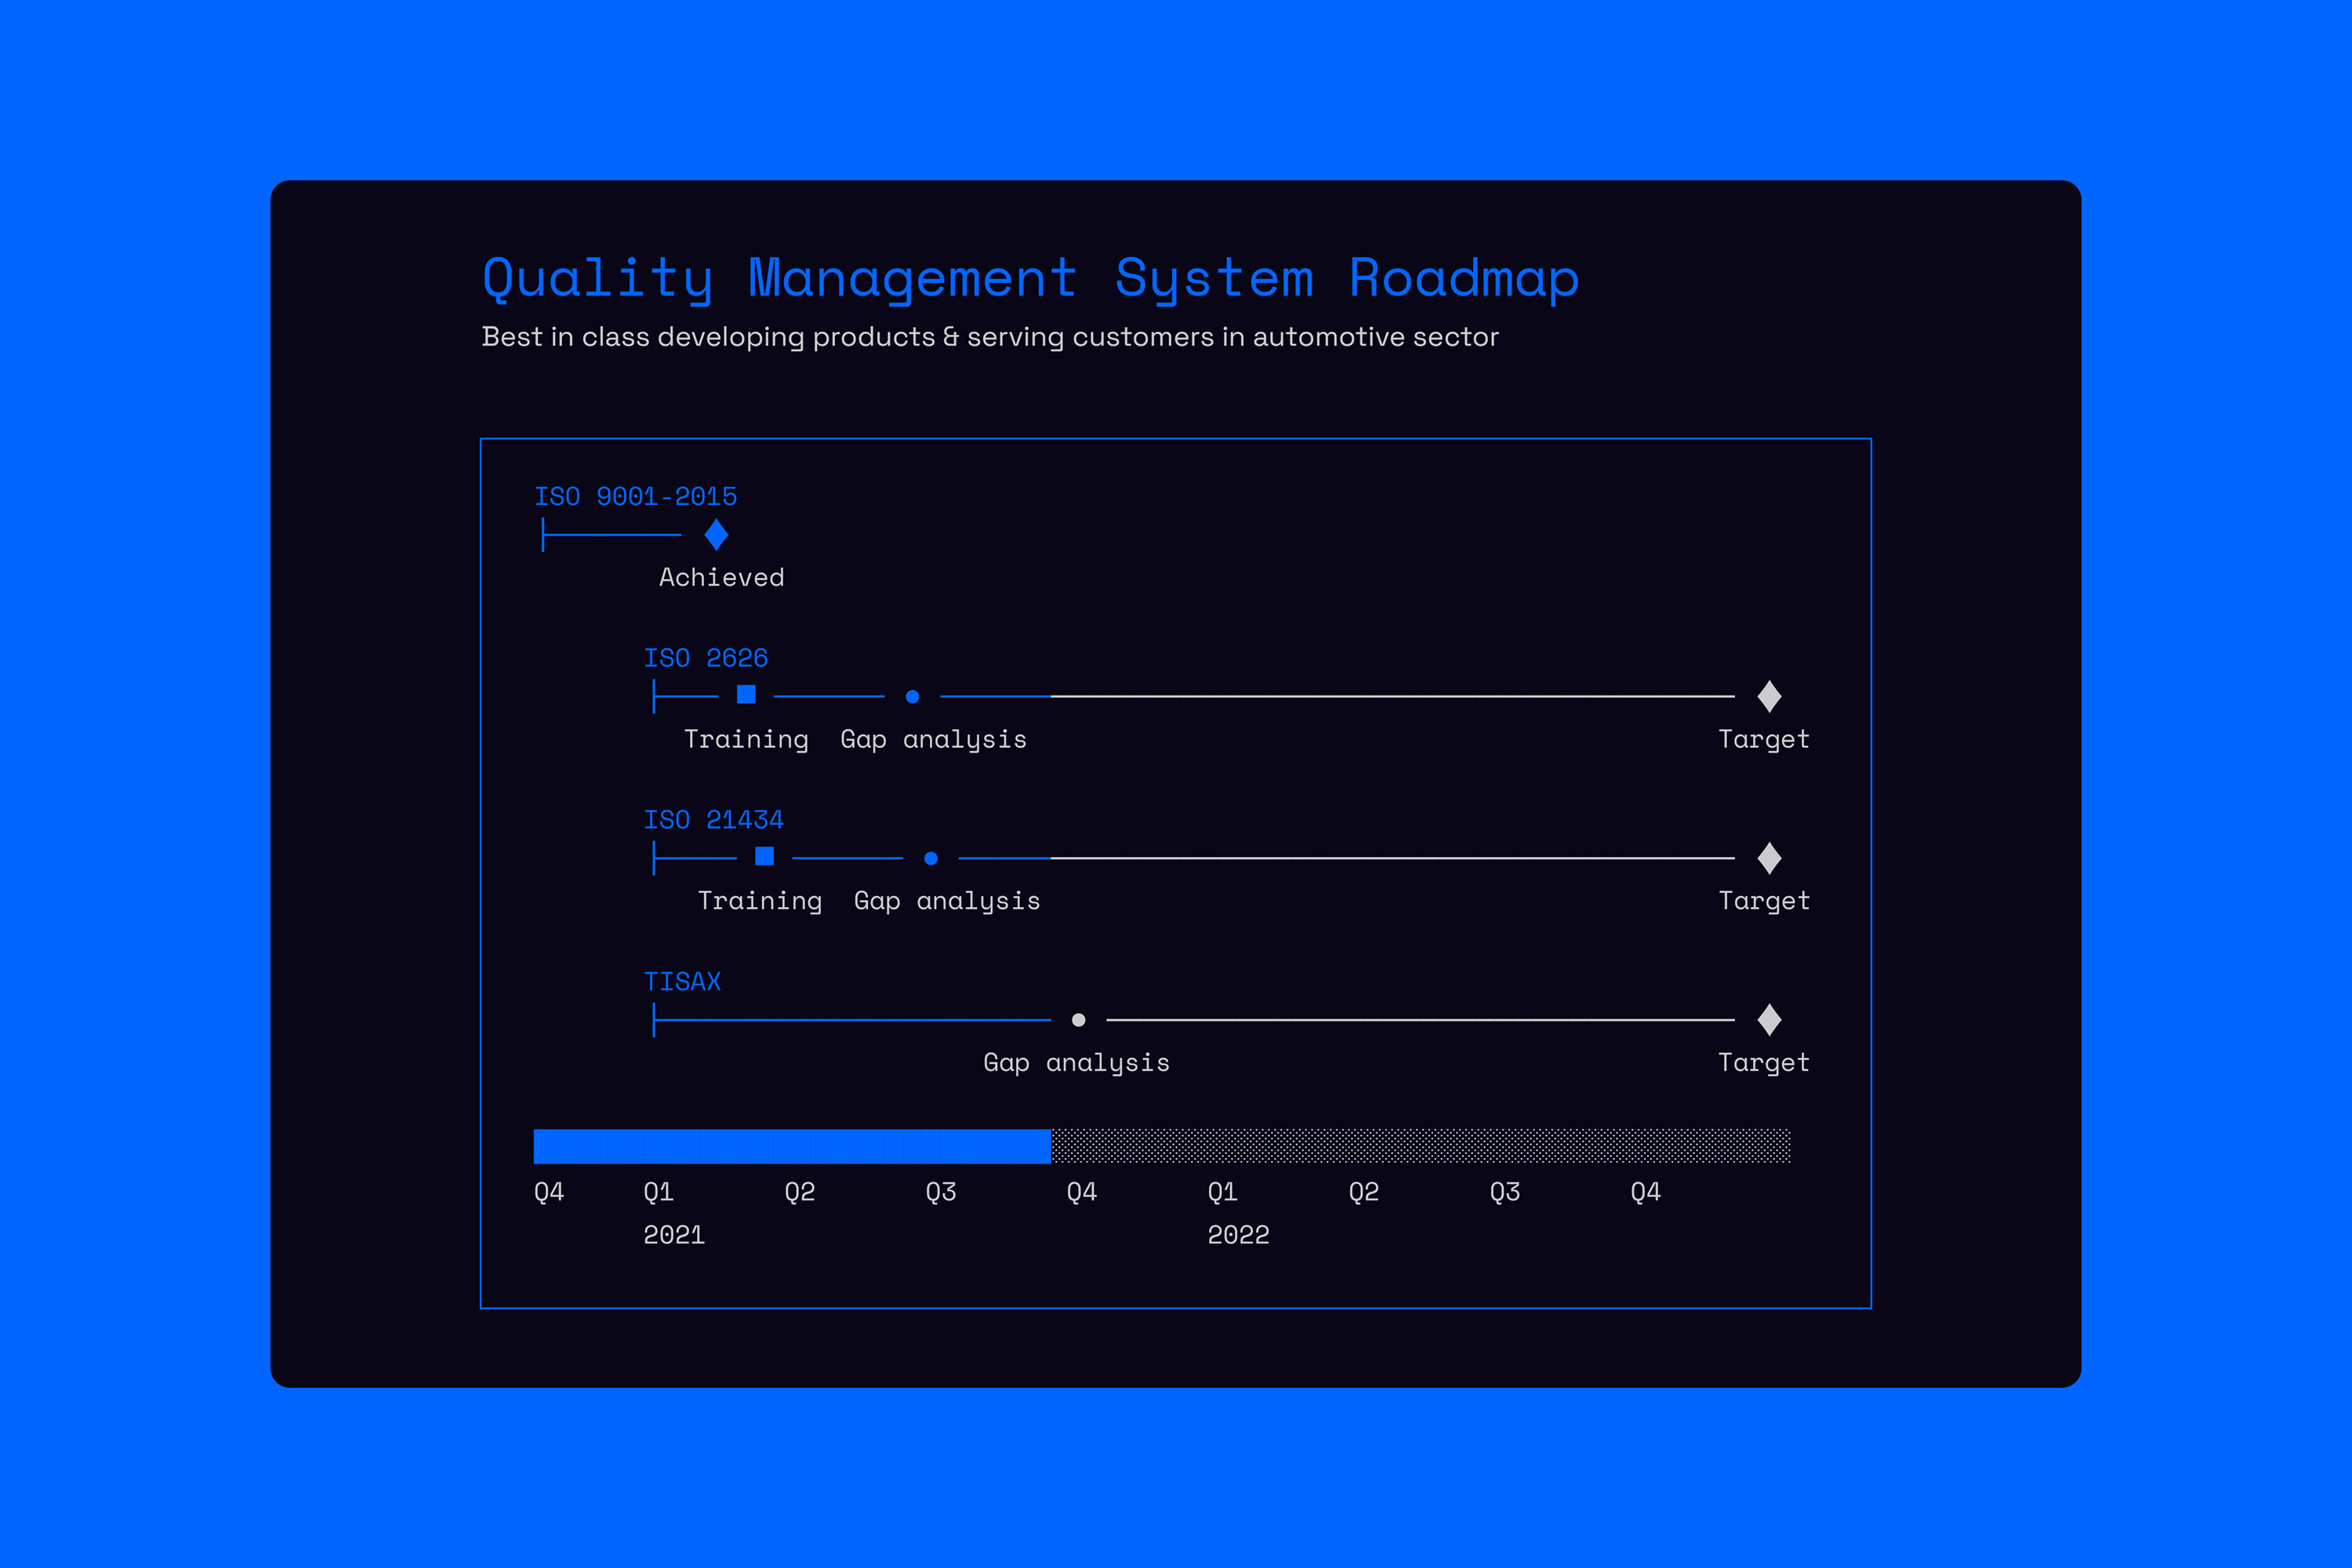 ROW_Quality_Management_system_Roadmap